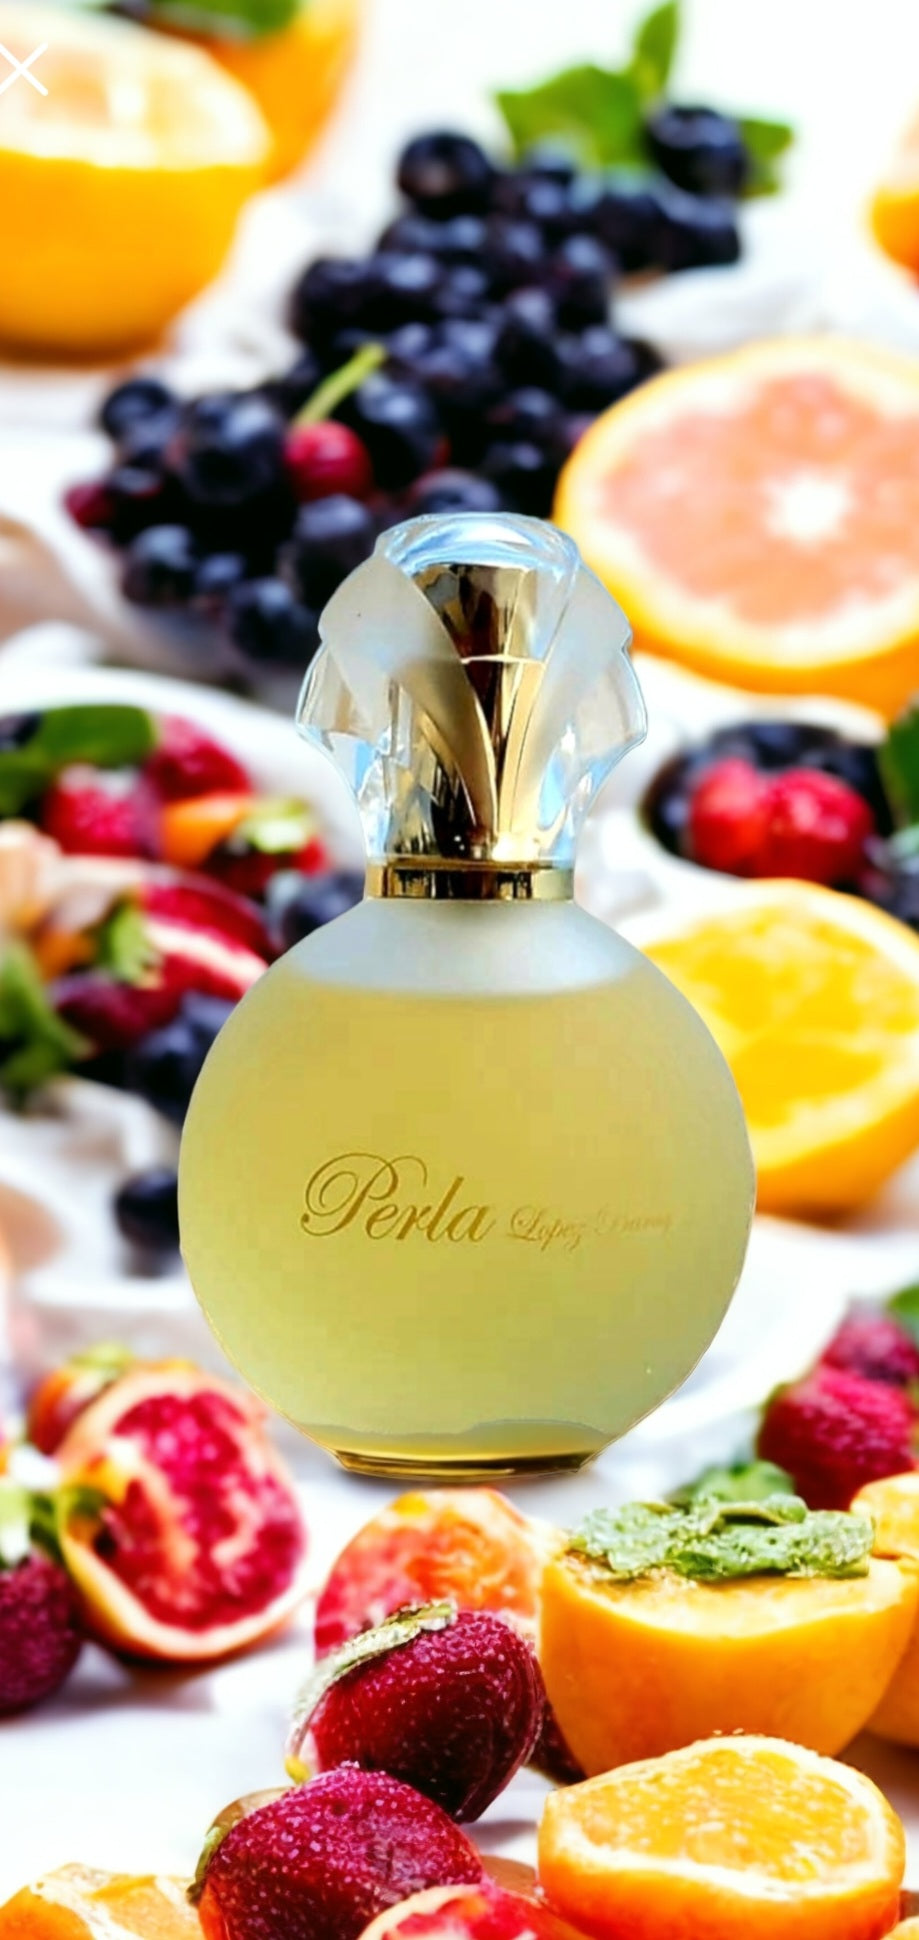 Perla López Baray Signature Scented Eau de Parfum Spray is a sheer floral-citrus bouquet with top notes of Mandarin and Lemon, middle notes of Freesia, Mimosa and Jasmine and bottom notes of Sandalwood and Oakmoss